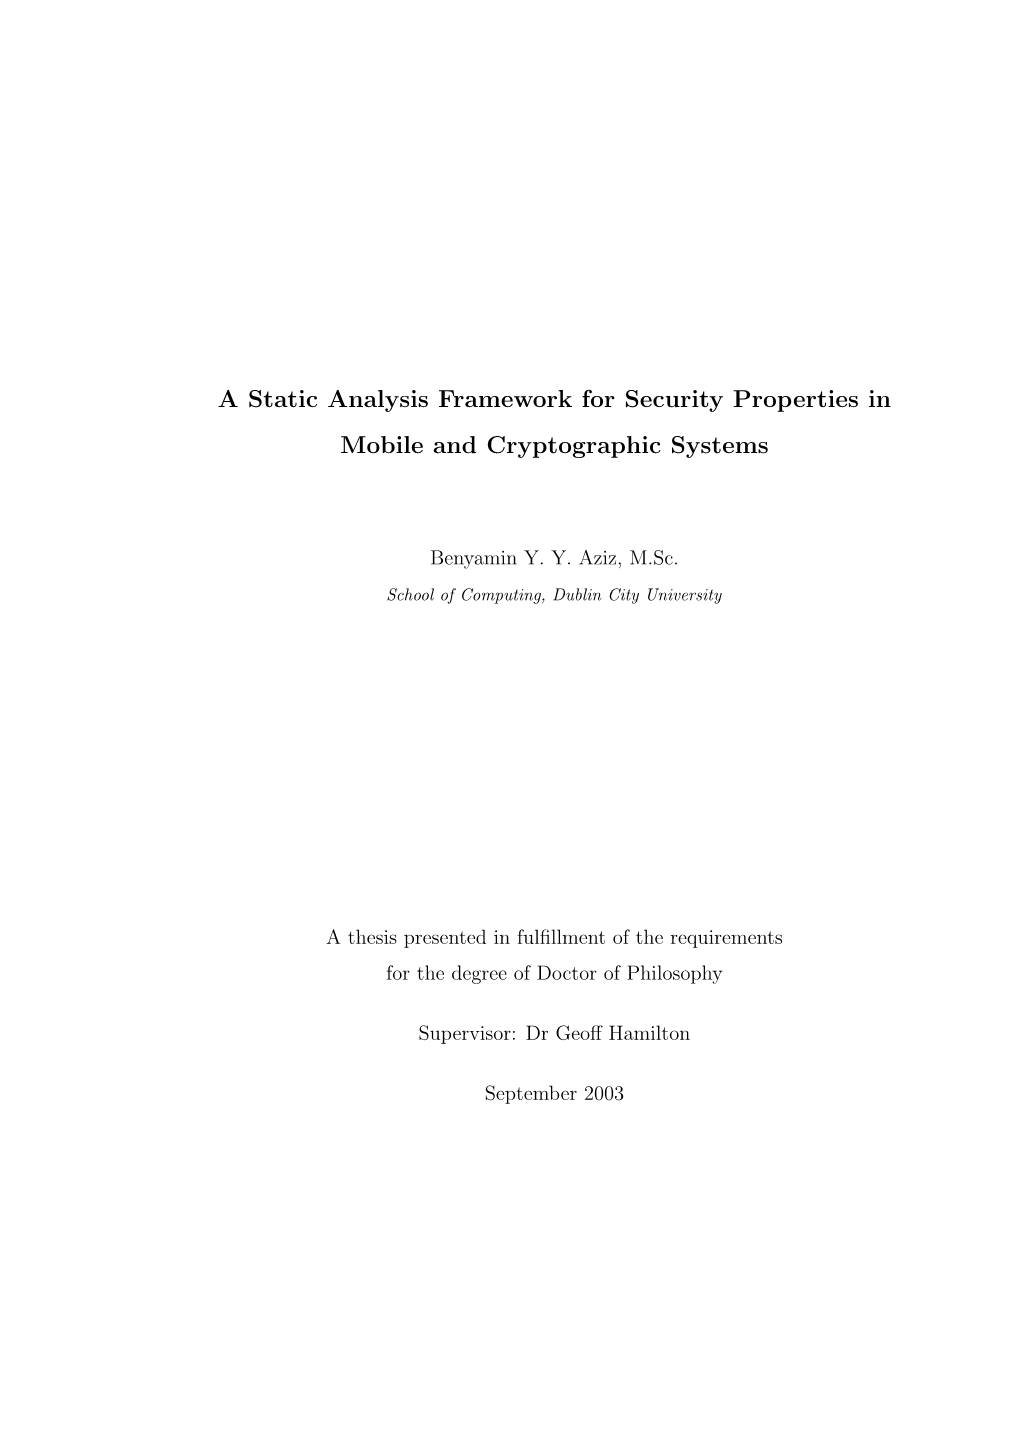 A Static Analysis Framework for Security Properties in Mobile and Cryptographic Systems